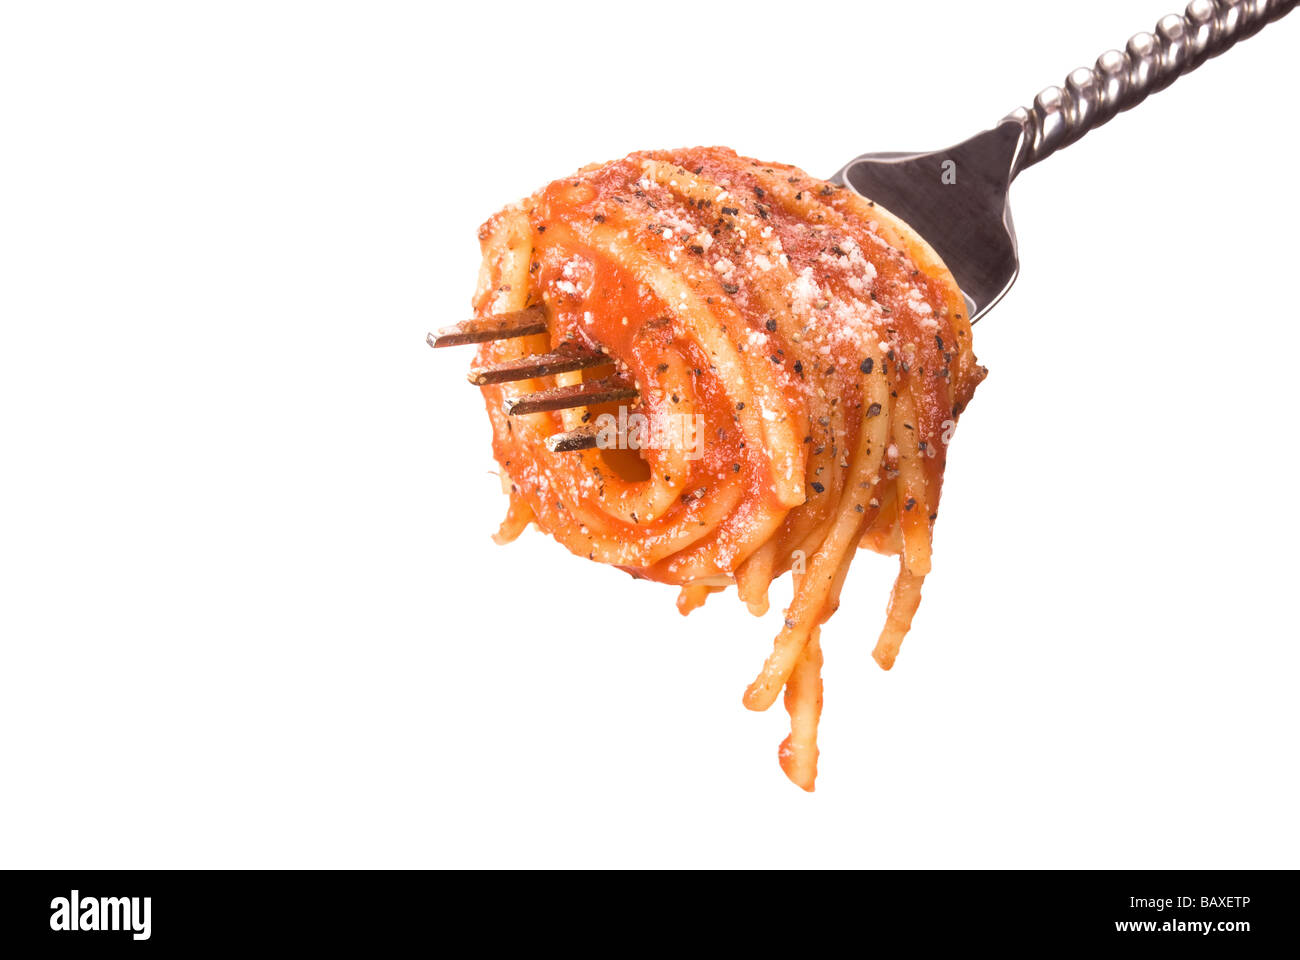 A fork with Spaghetti pasta wrapped around it and isolated on a white background Stock Photo